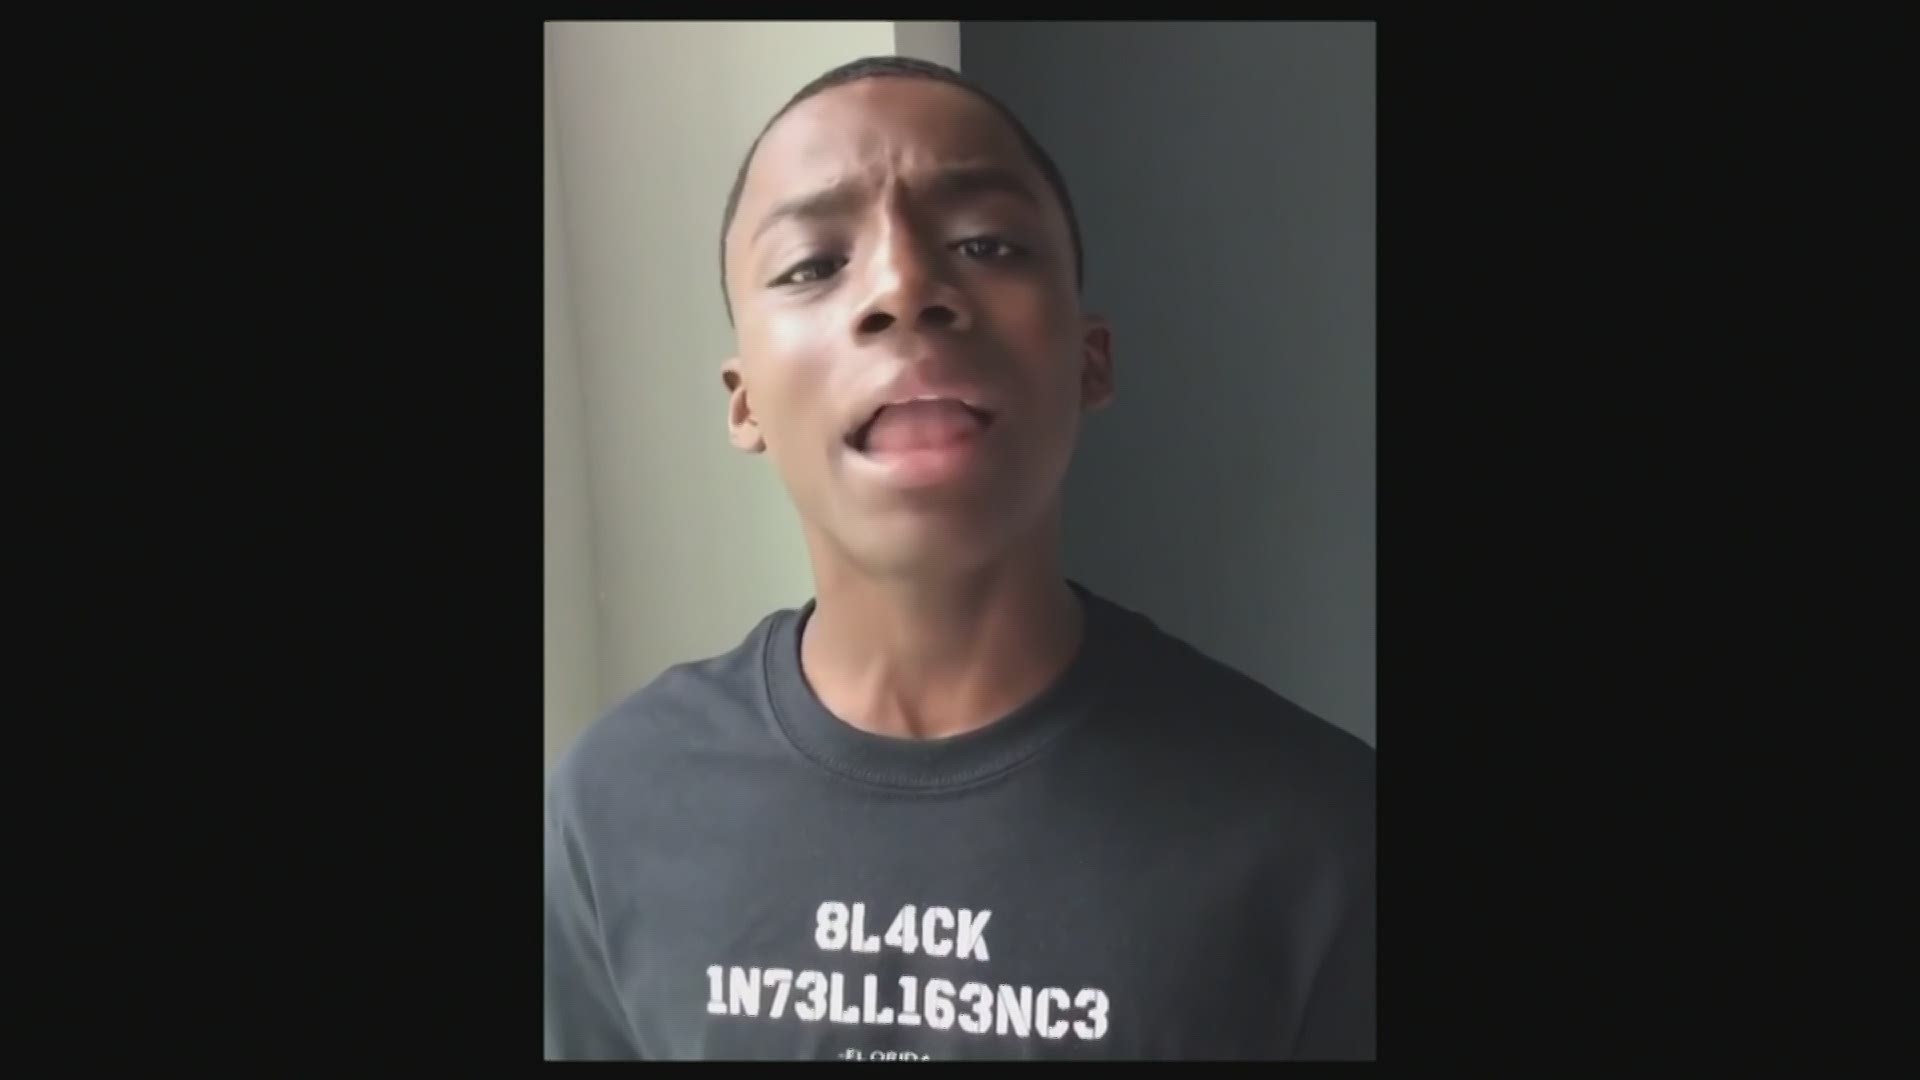 12-year-old Keedron Bryant turns heads on social media with passionate performance about being a young black man in today’s world.